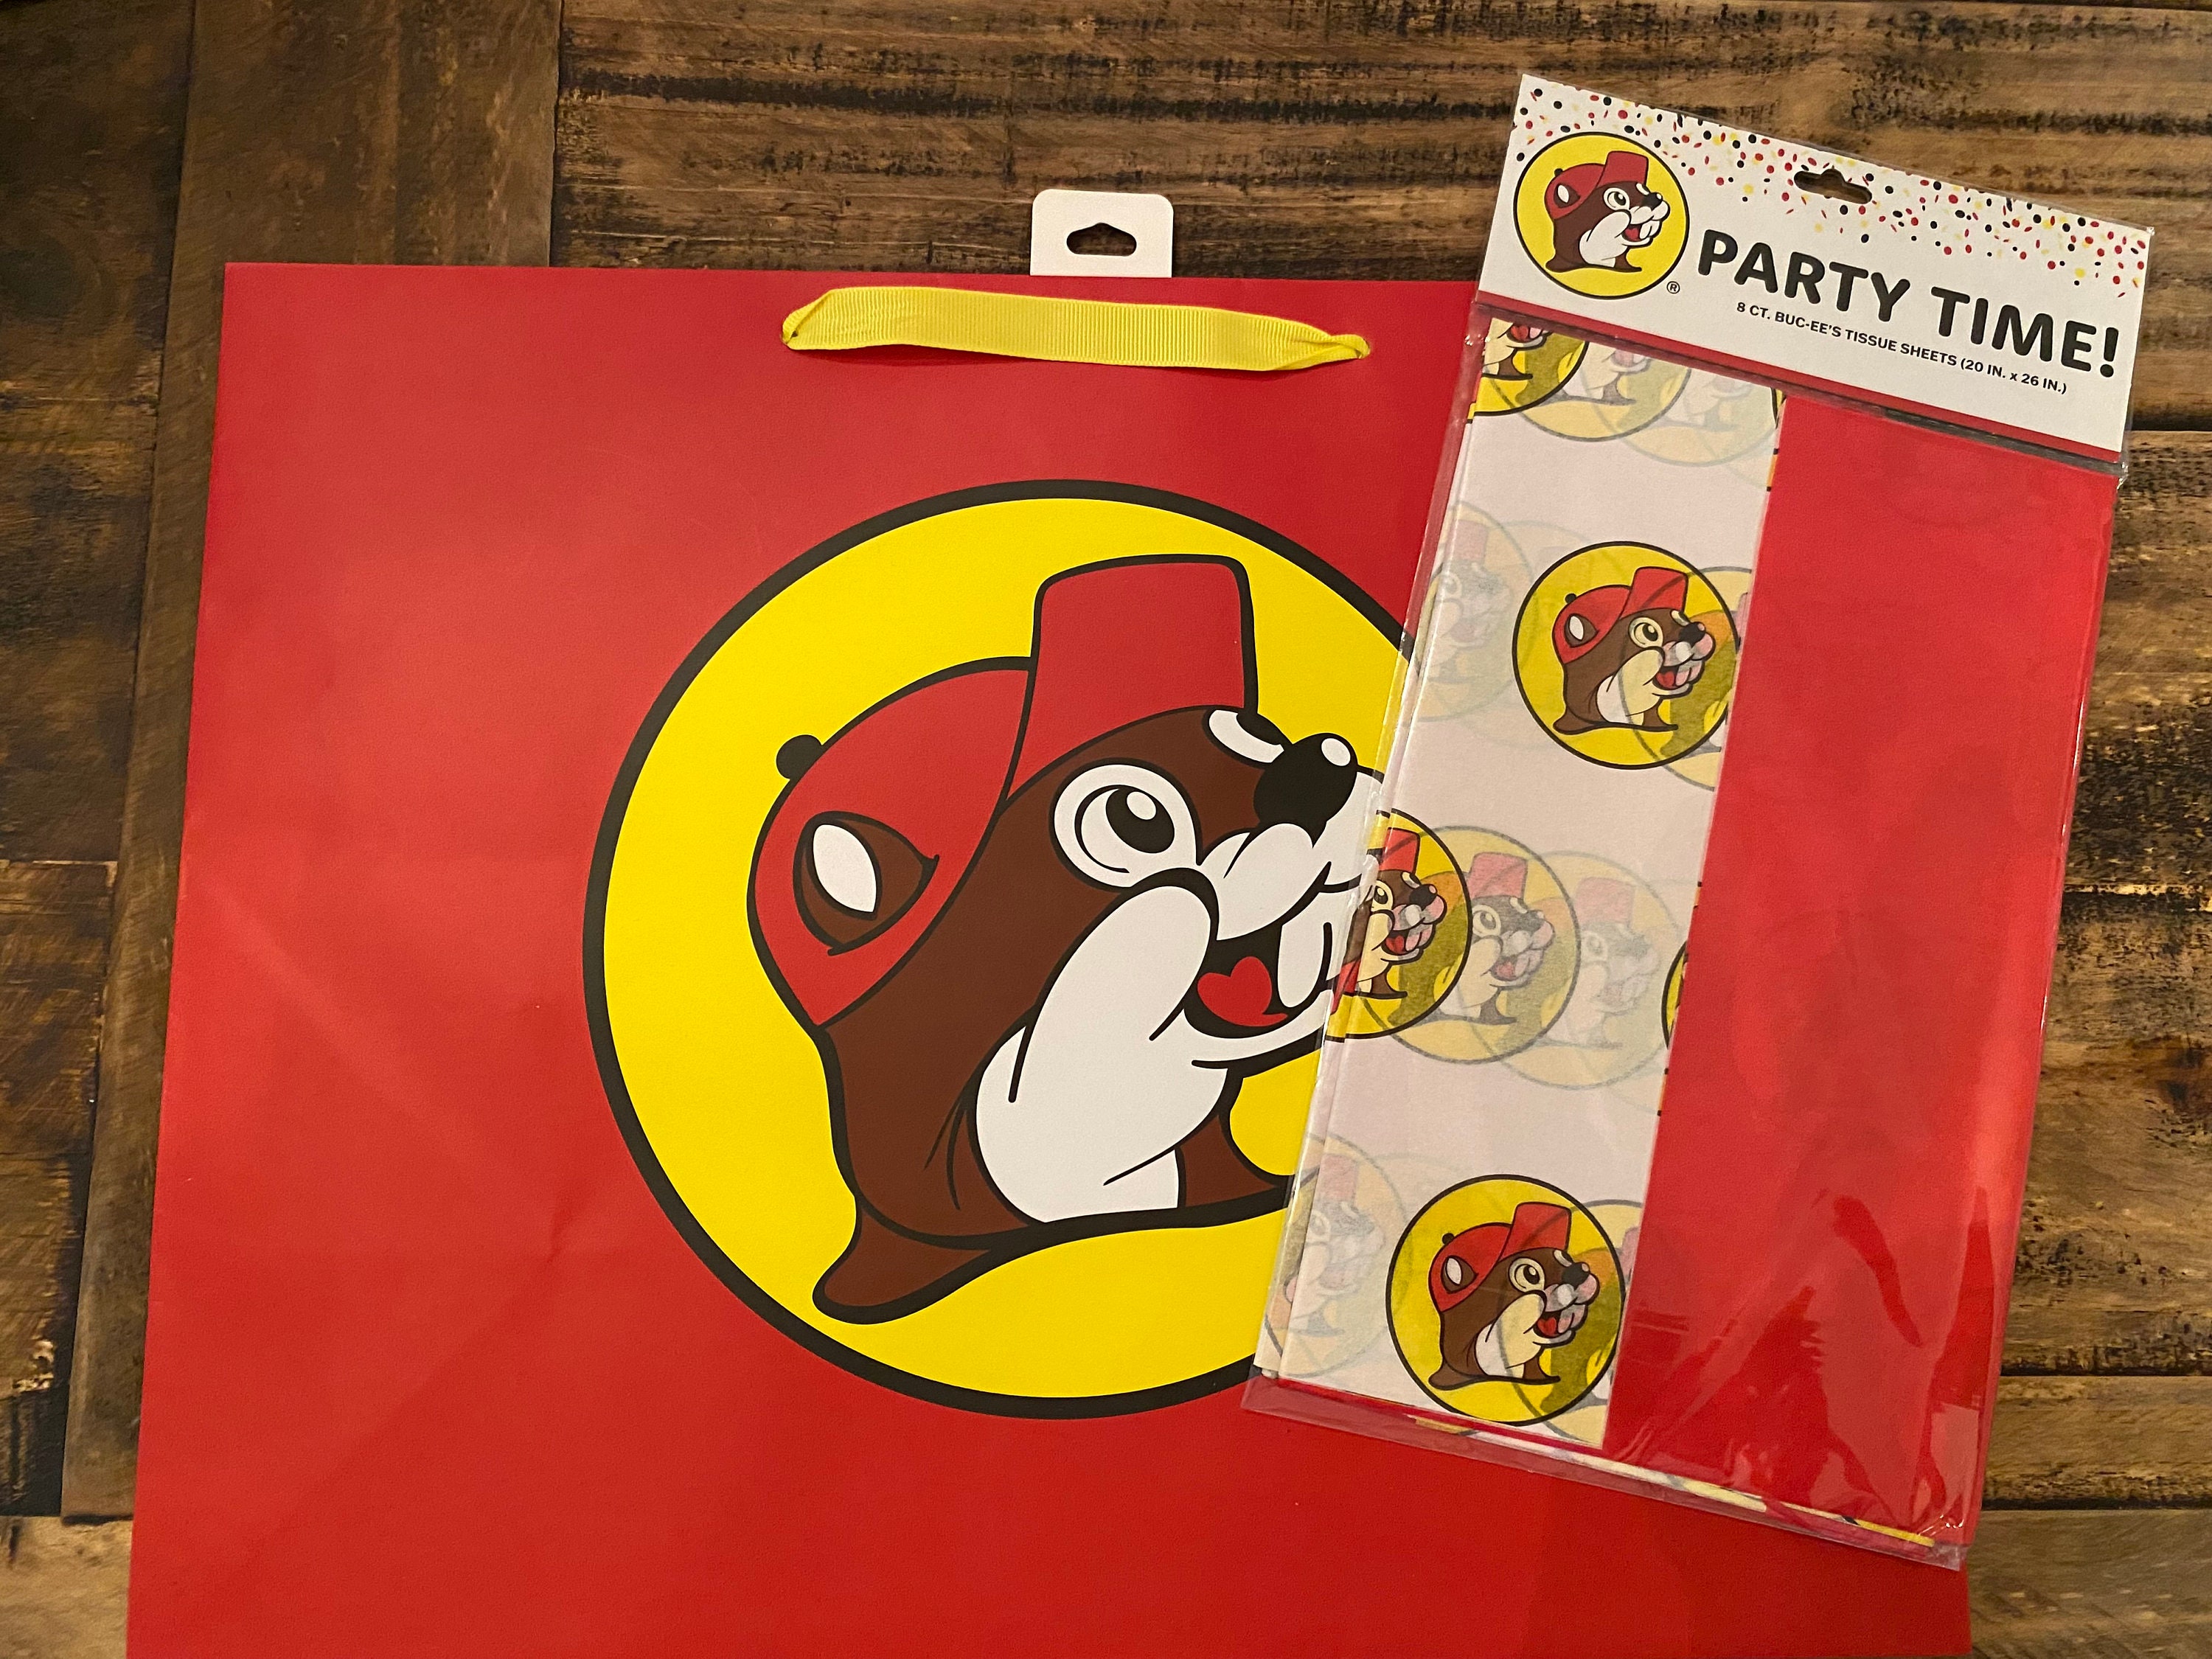 Bucees Gift Bags and Tissue Paper 